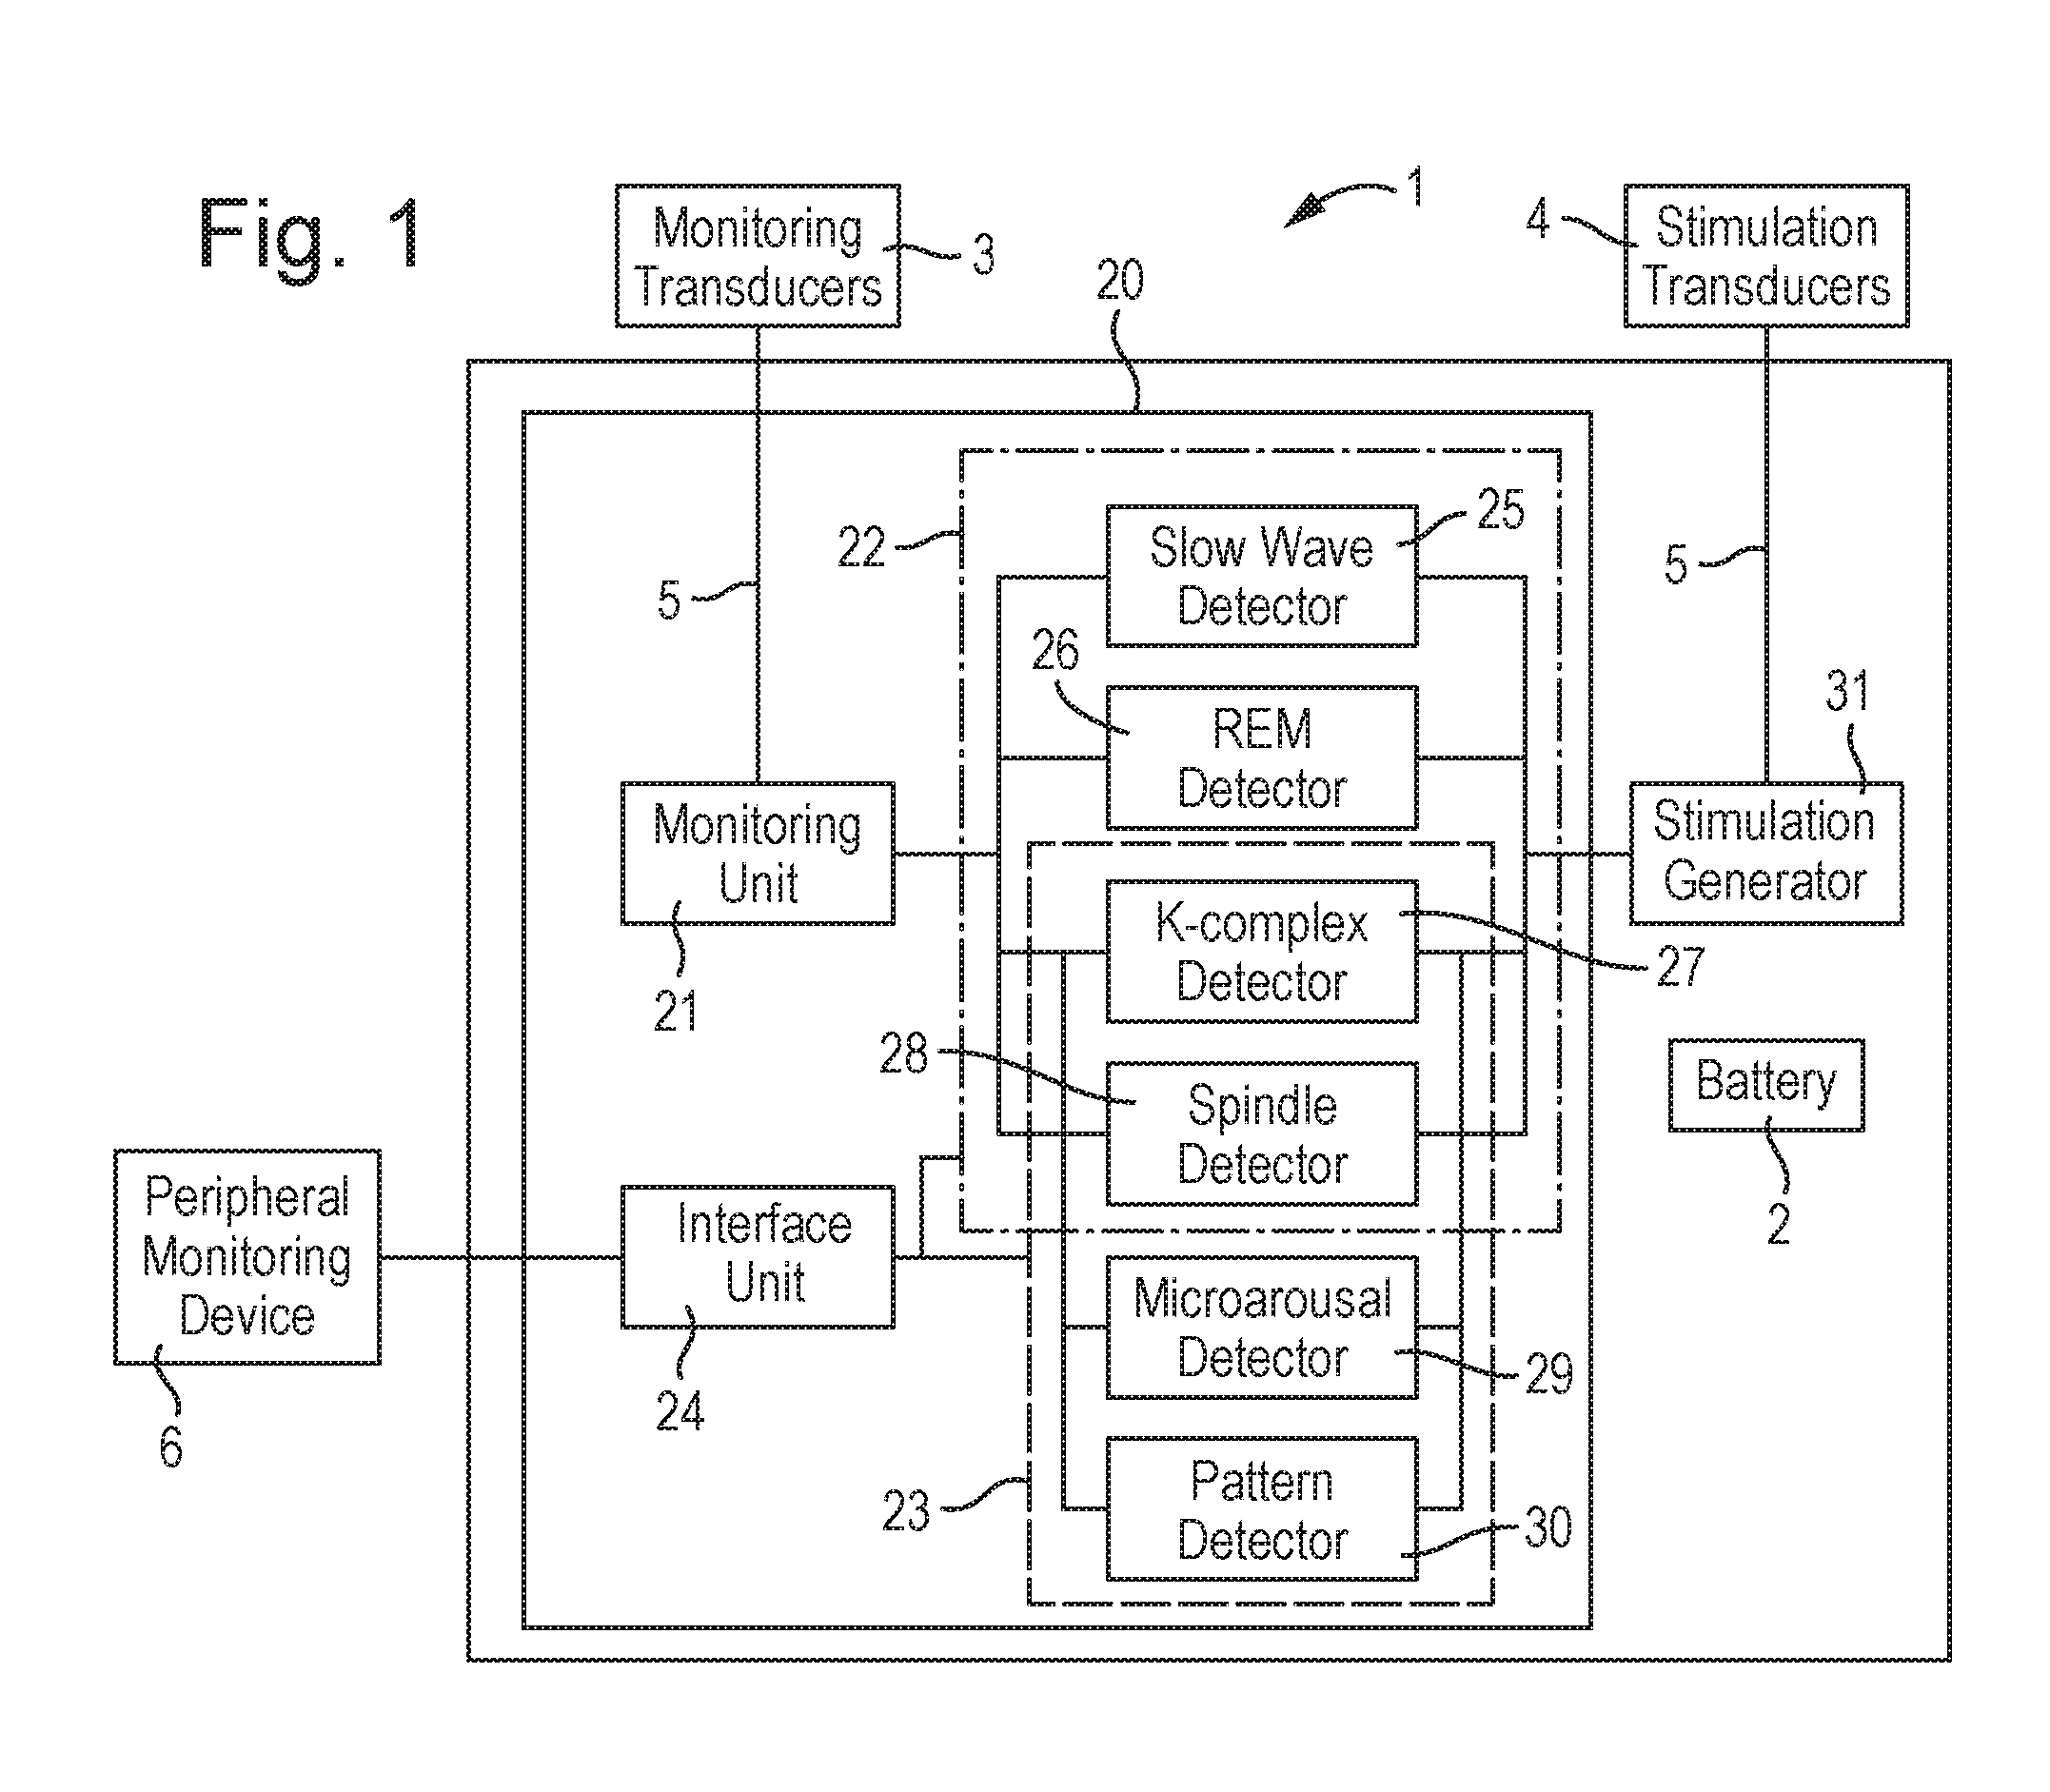 block diagram of the dectectors and interfaces in the invention